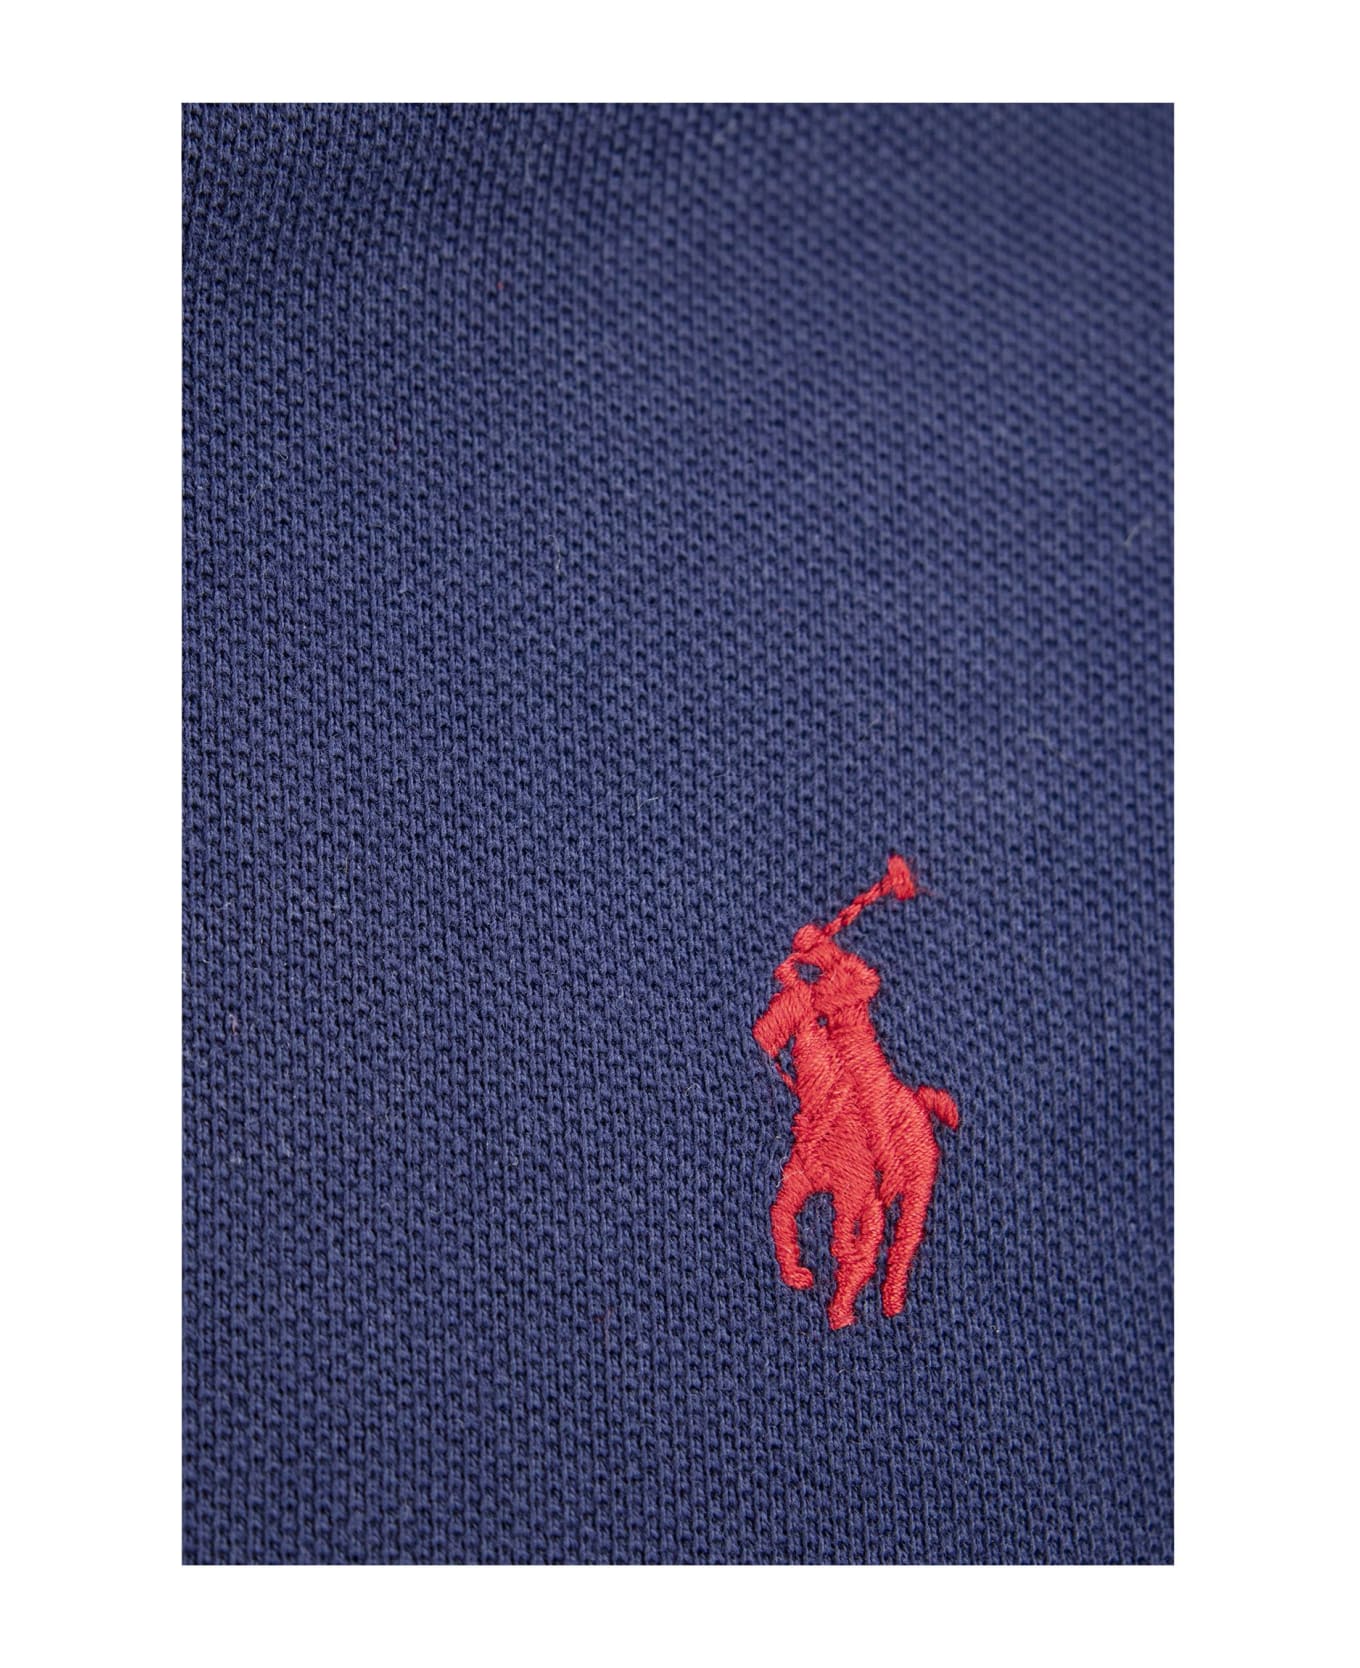 Ralph Lauren Navy Blue And Red Slim-fit Pique Polo Shirt - Blue